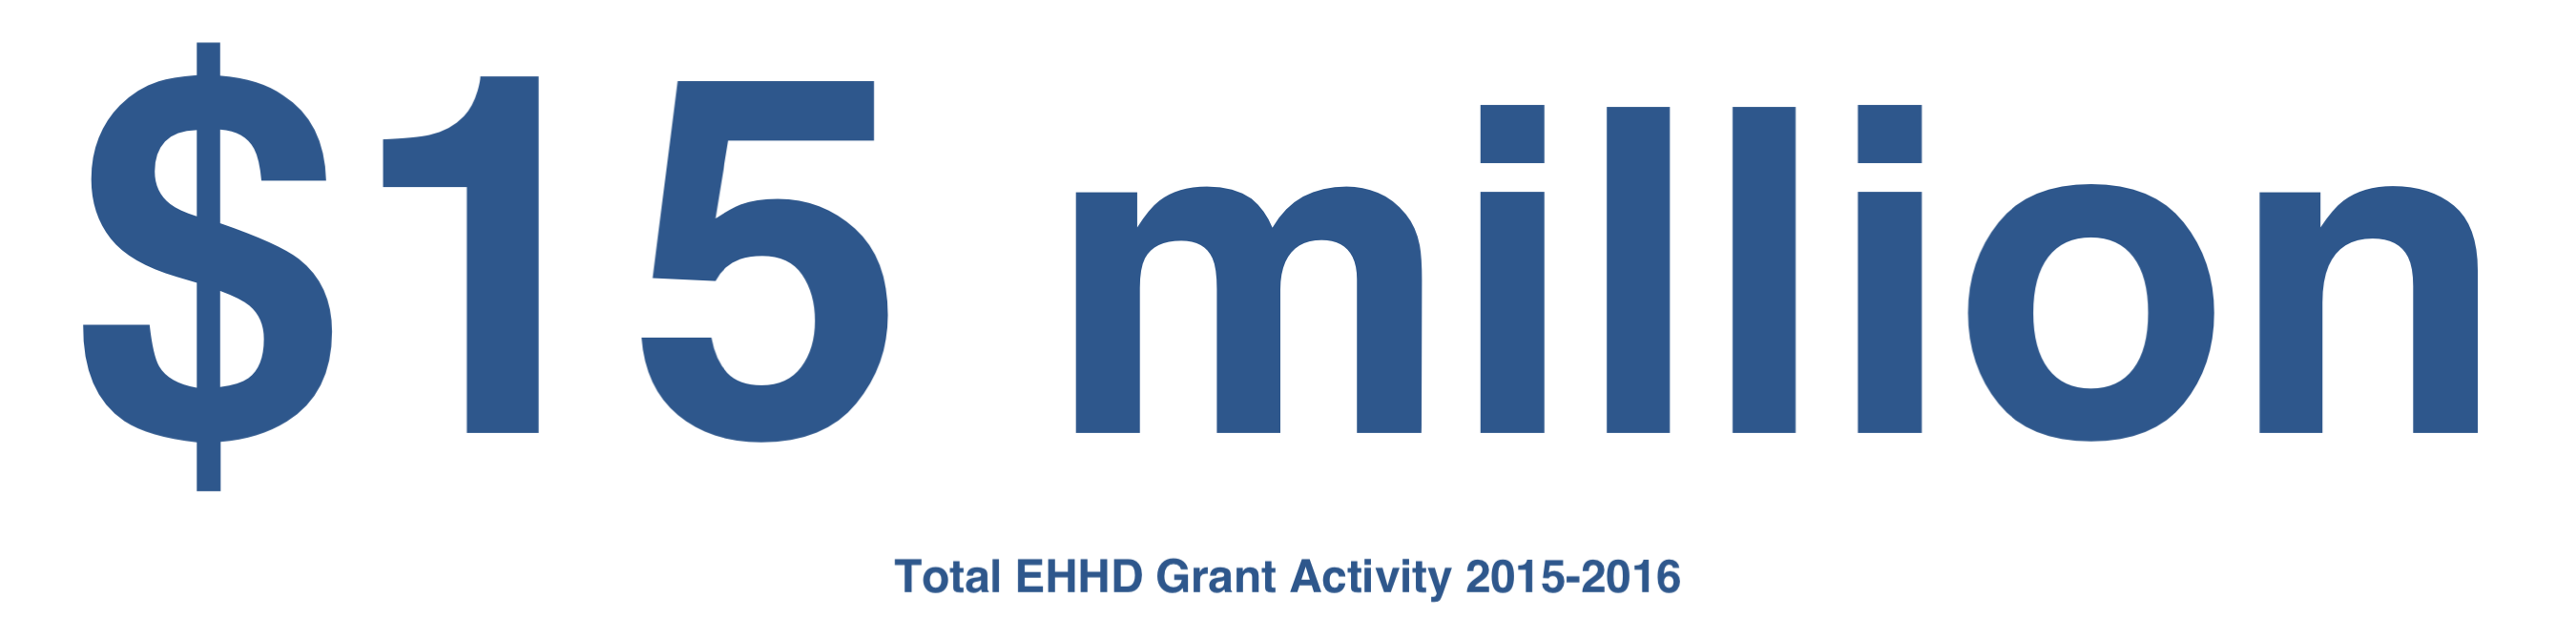 Numerical image showing EHHD total grant activity of 14.9 million USD